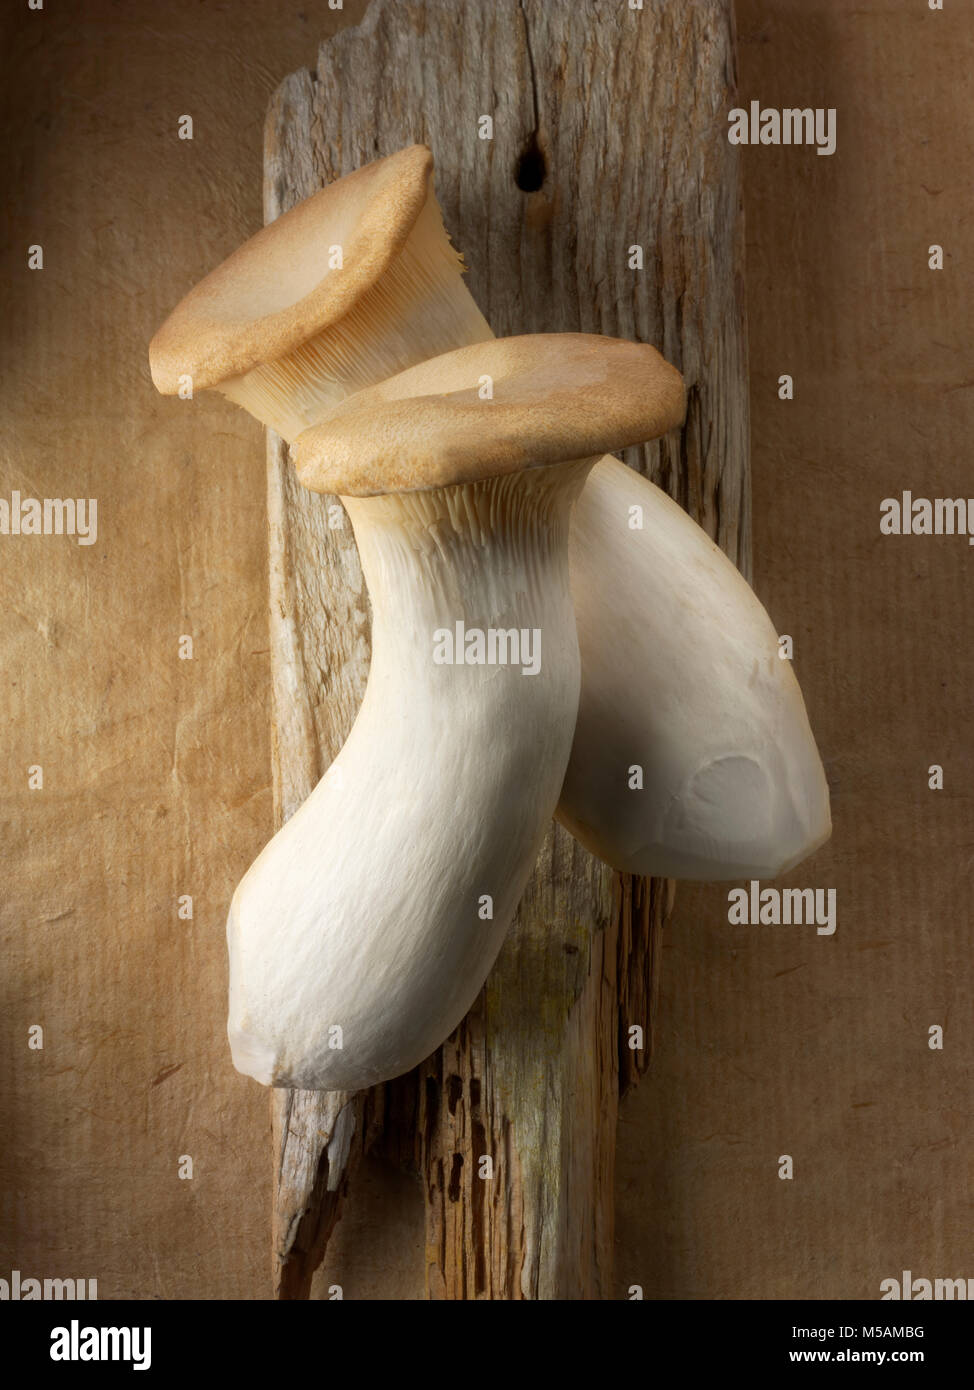 arrangement of Fresh picked  king oyster mushrooms against a wood background Stock Photo